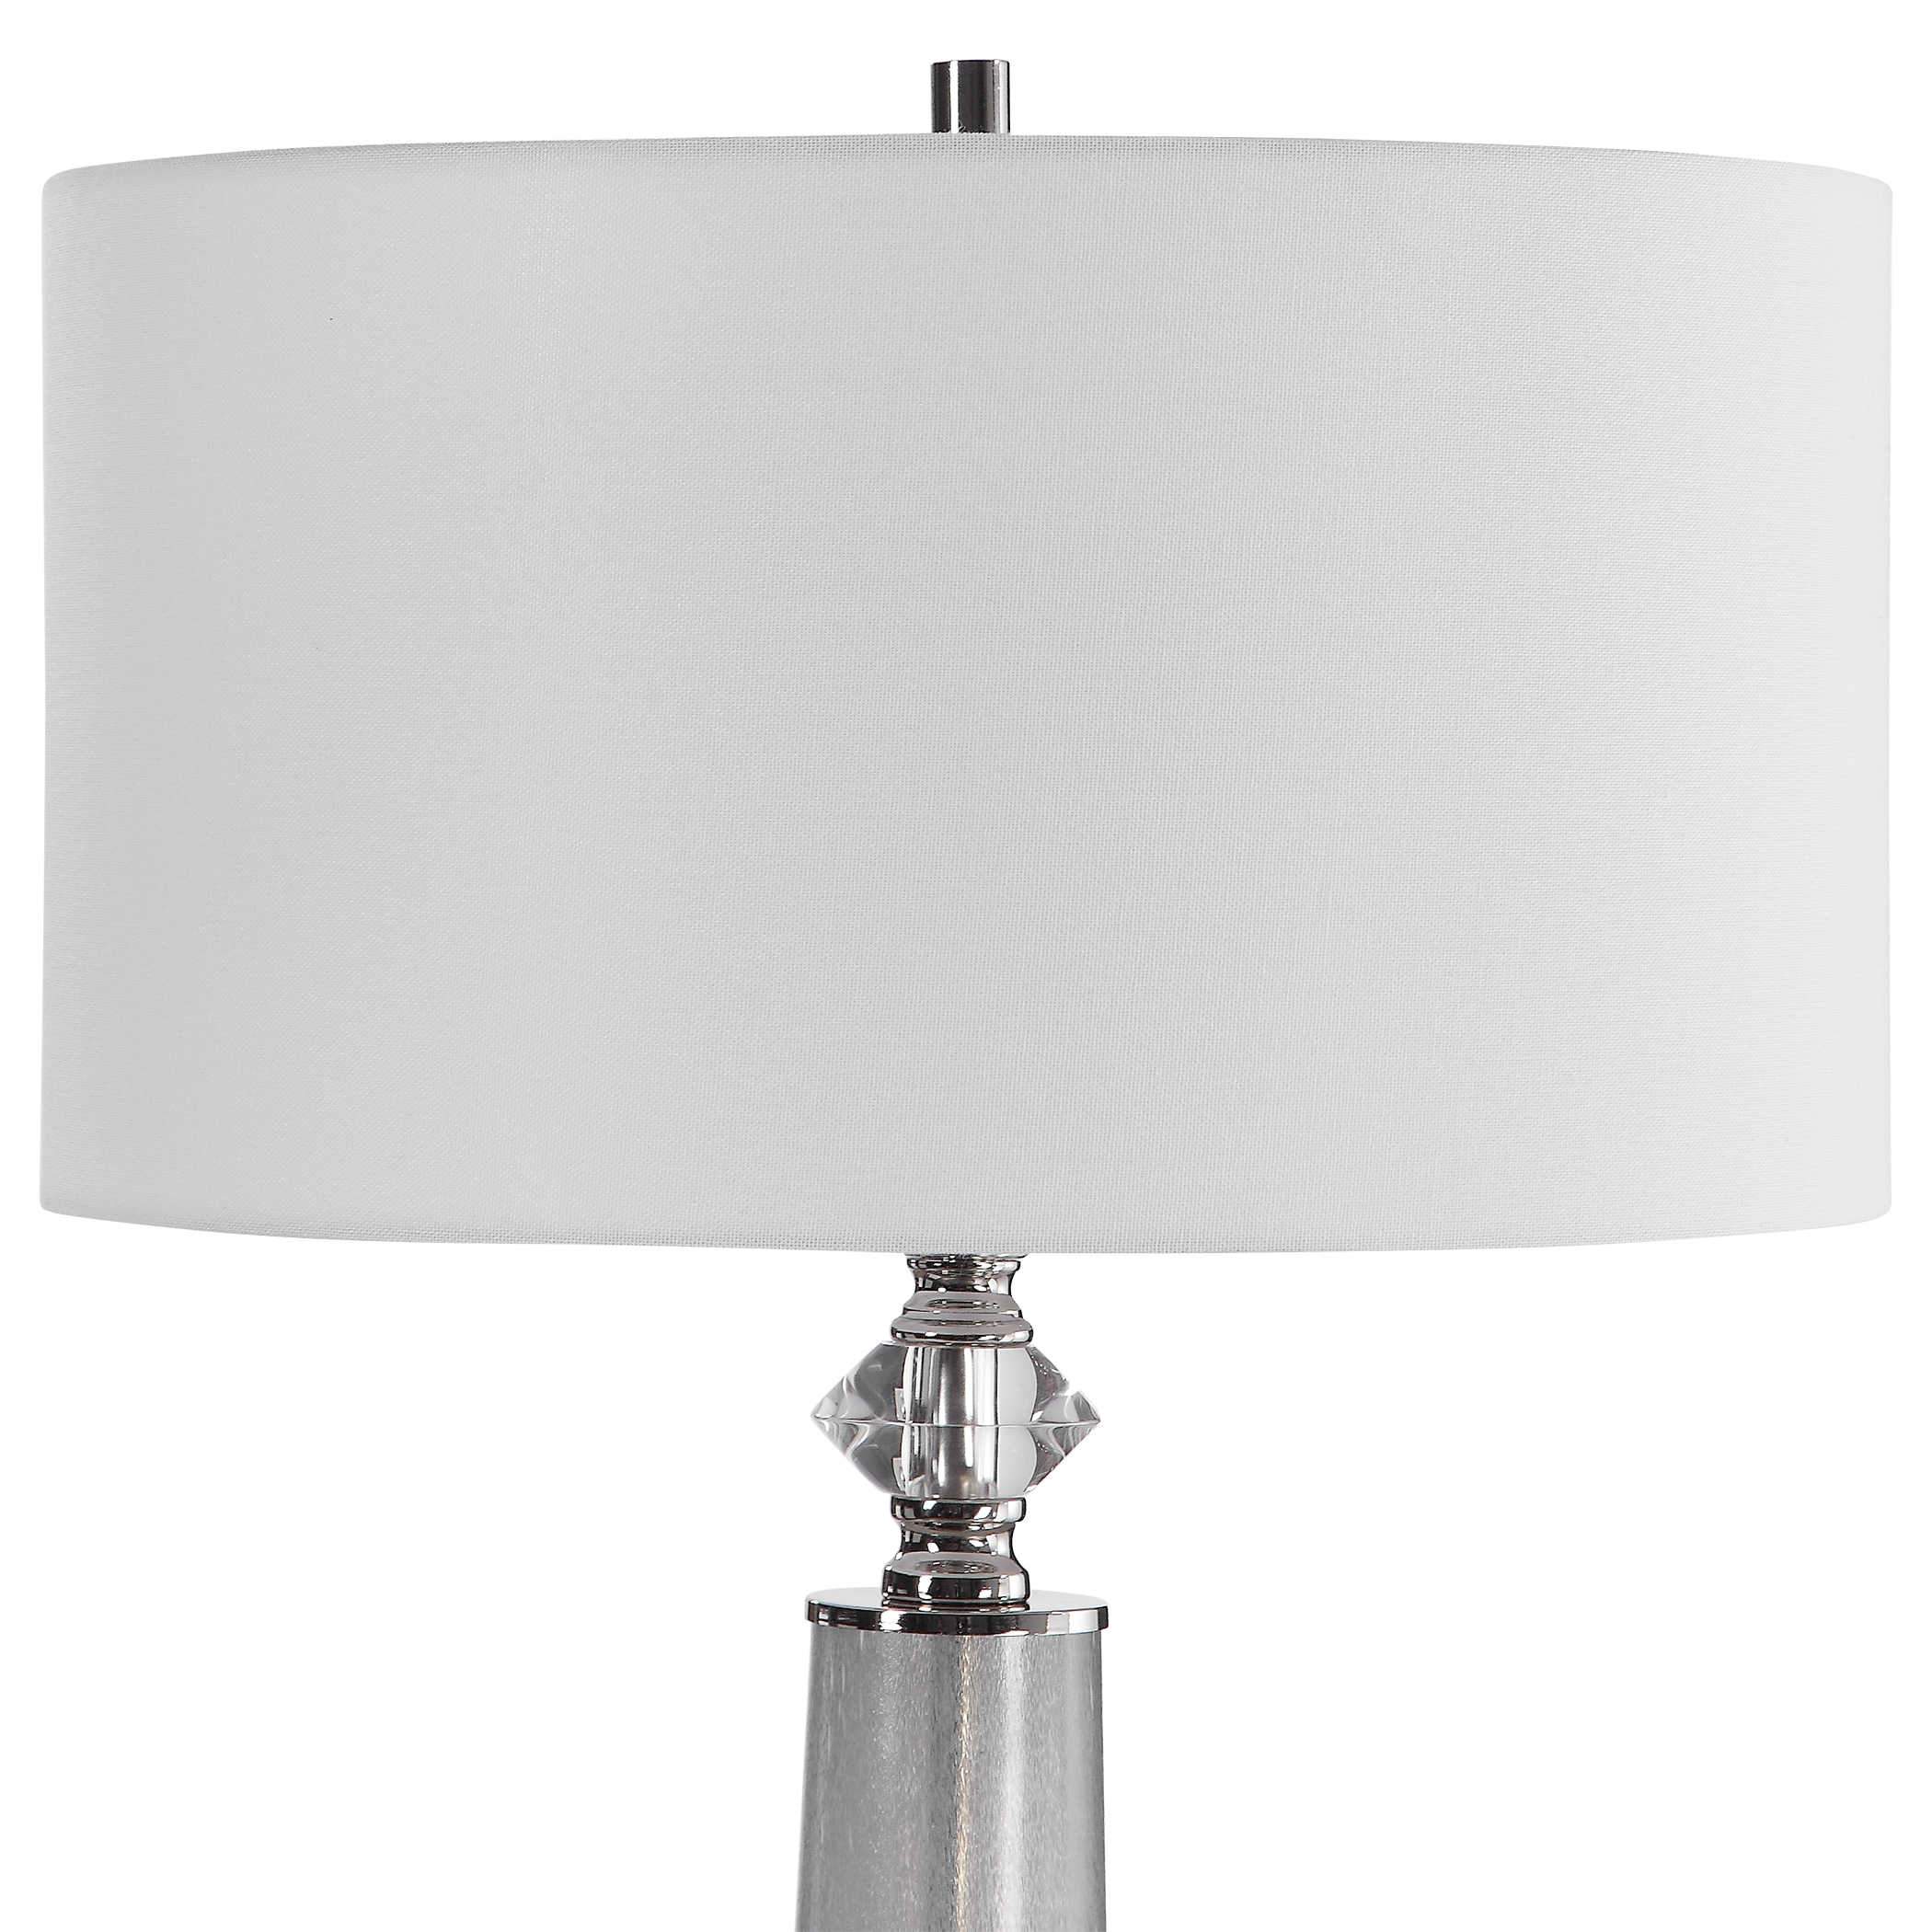 Graytone Frosted Glass Table Lamp Uttermost